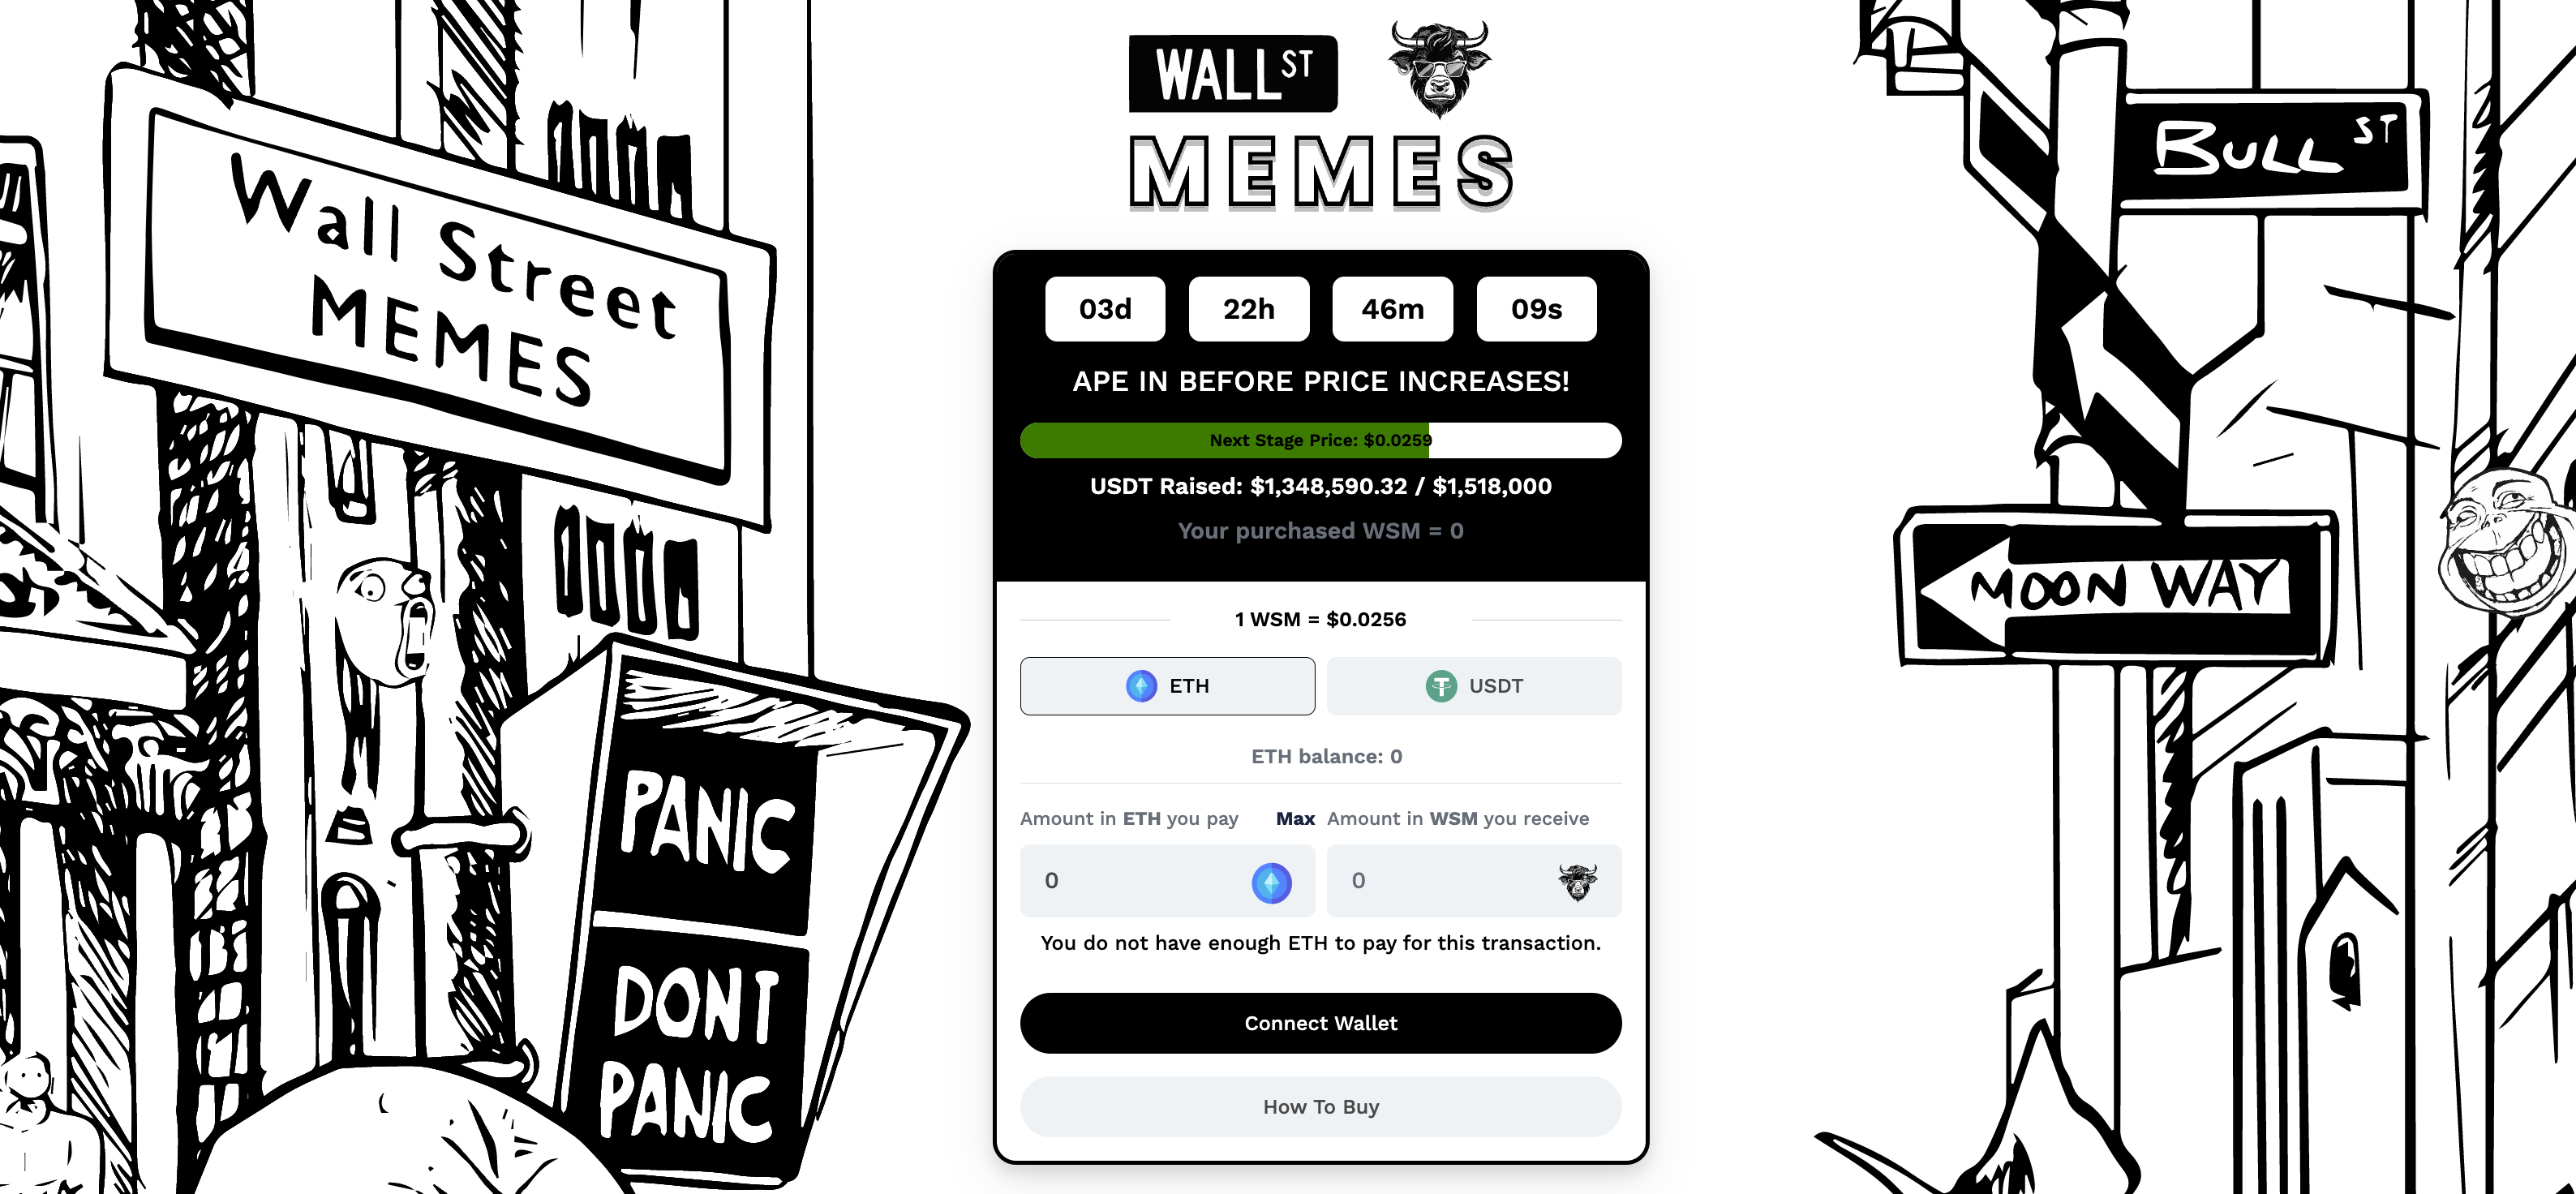 The Memecoin Hype: How Social Media Drives Frenzies and Price Surges